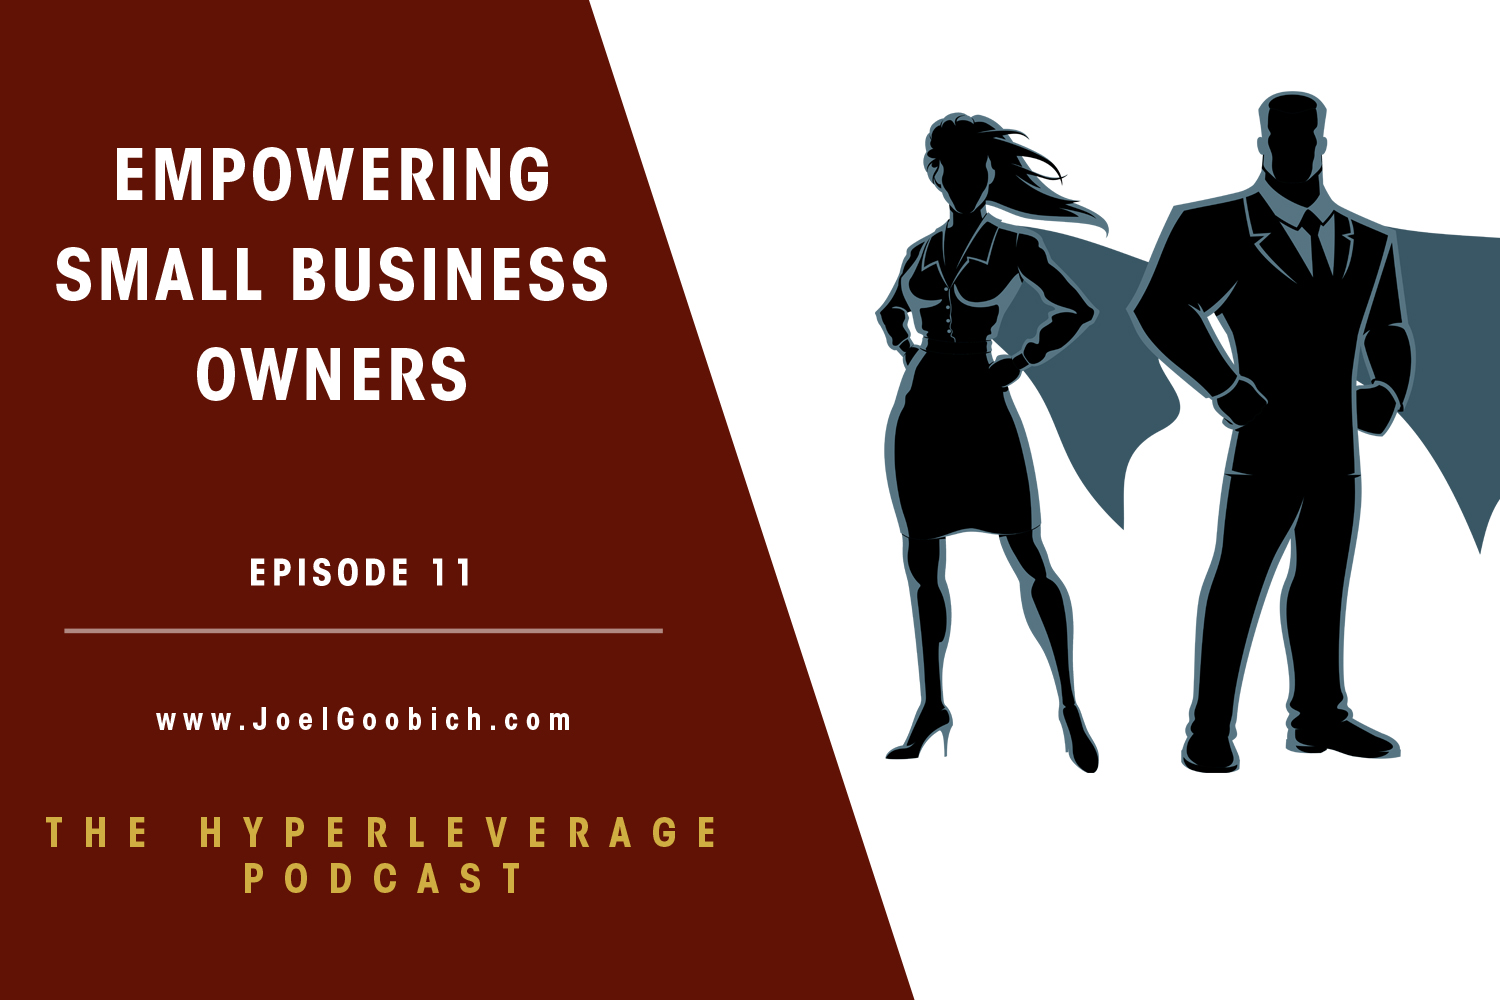 small business owners are empowered by leveraging all of their resources